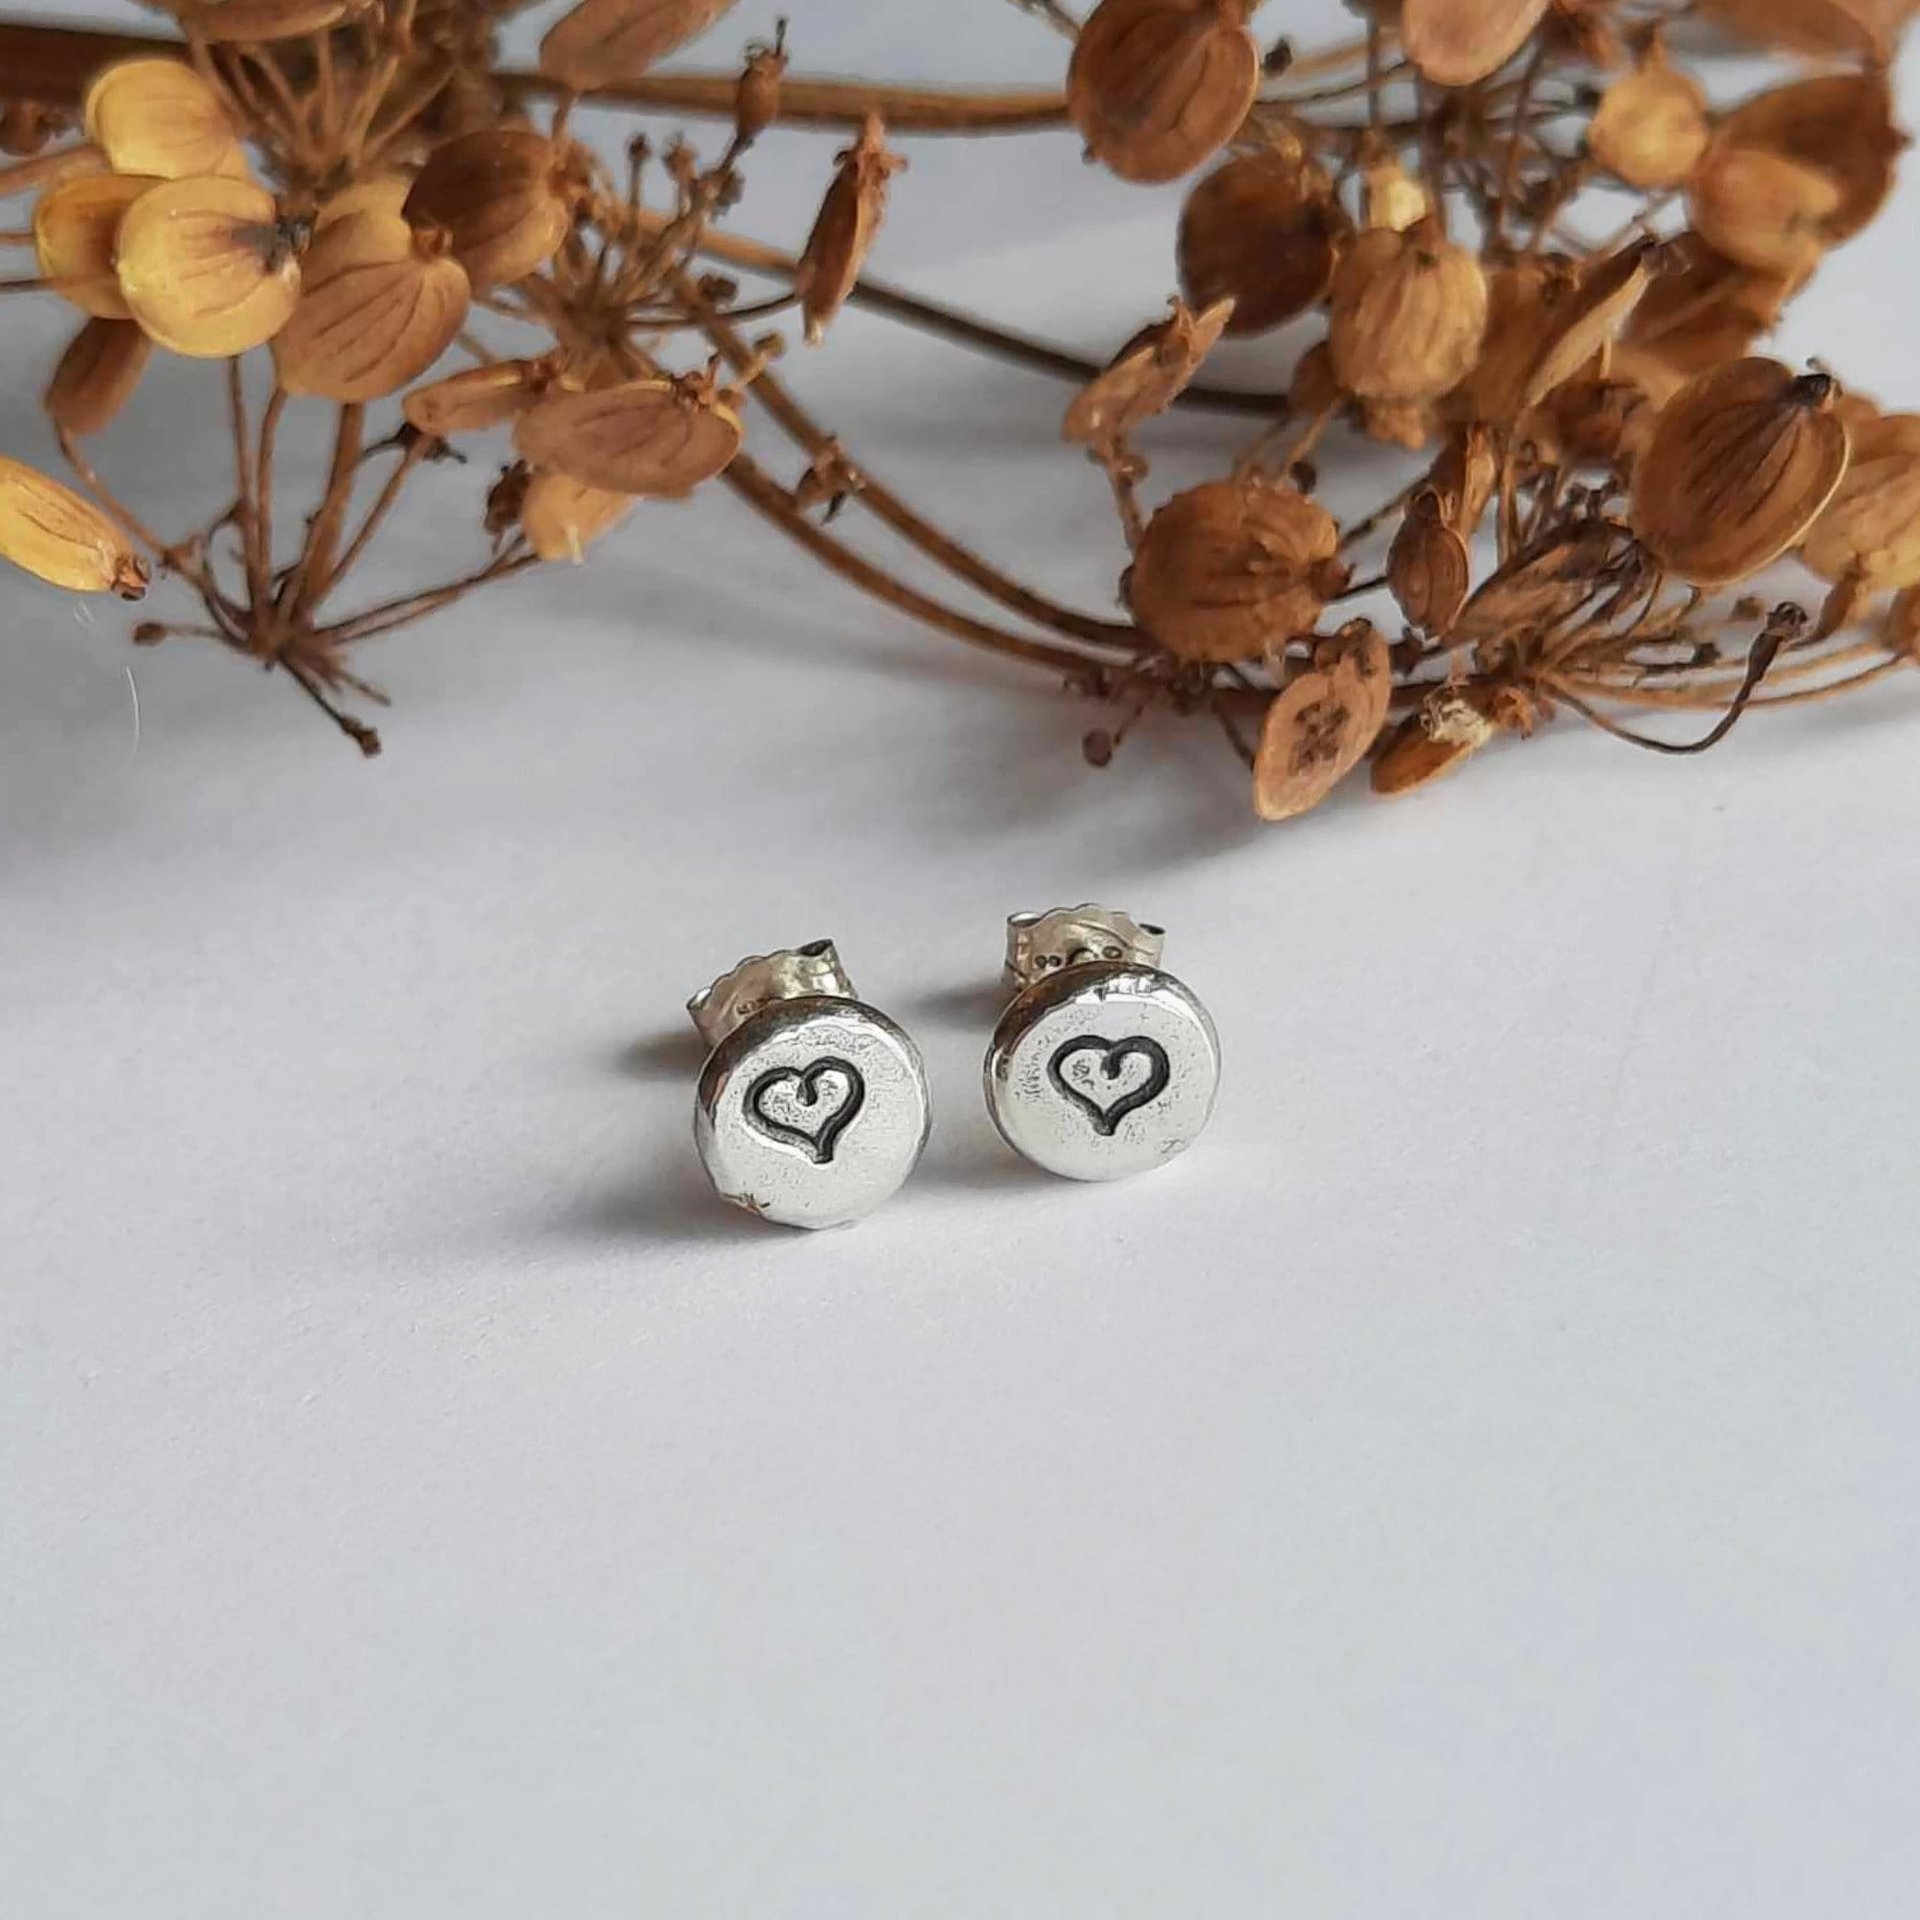 Dainty little recycled sterling silver love heart stud earrings, handcrafted by The Tiny Tree Frog Jewellery